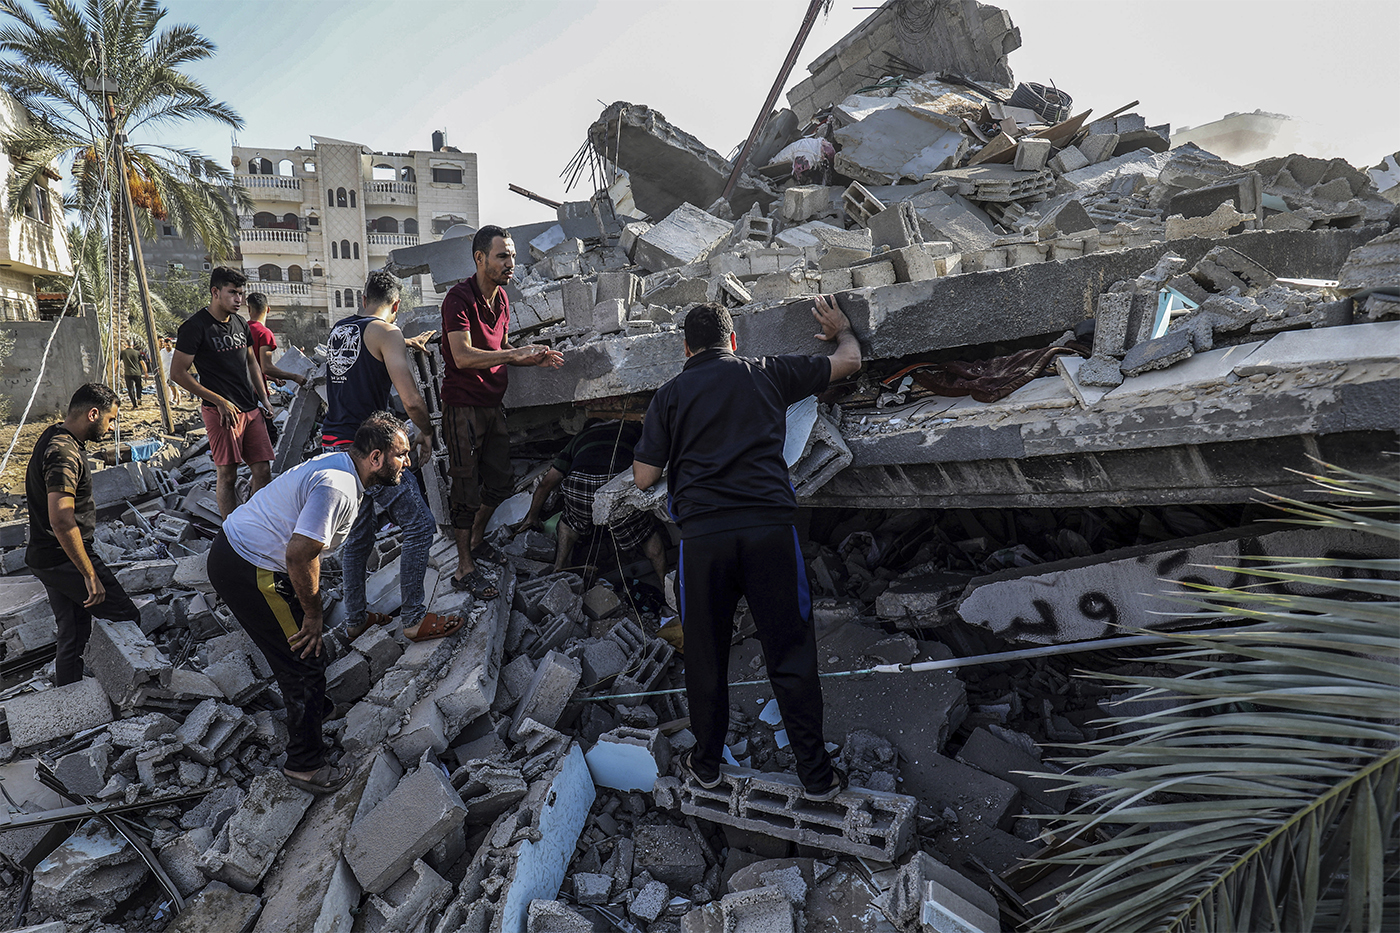 Palestinians searching for survivors among rubble.